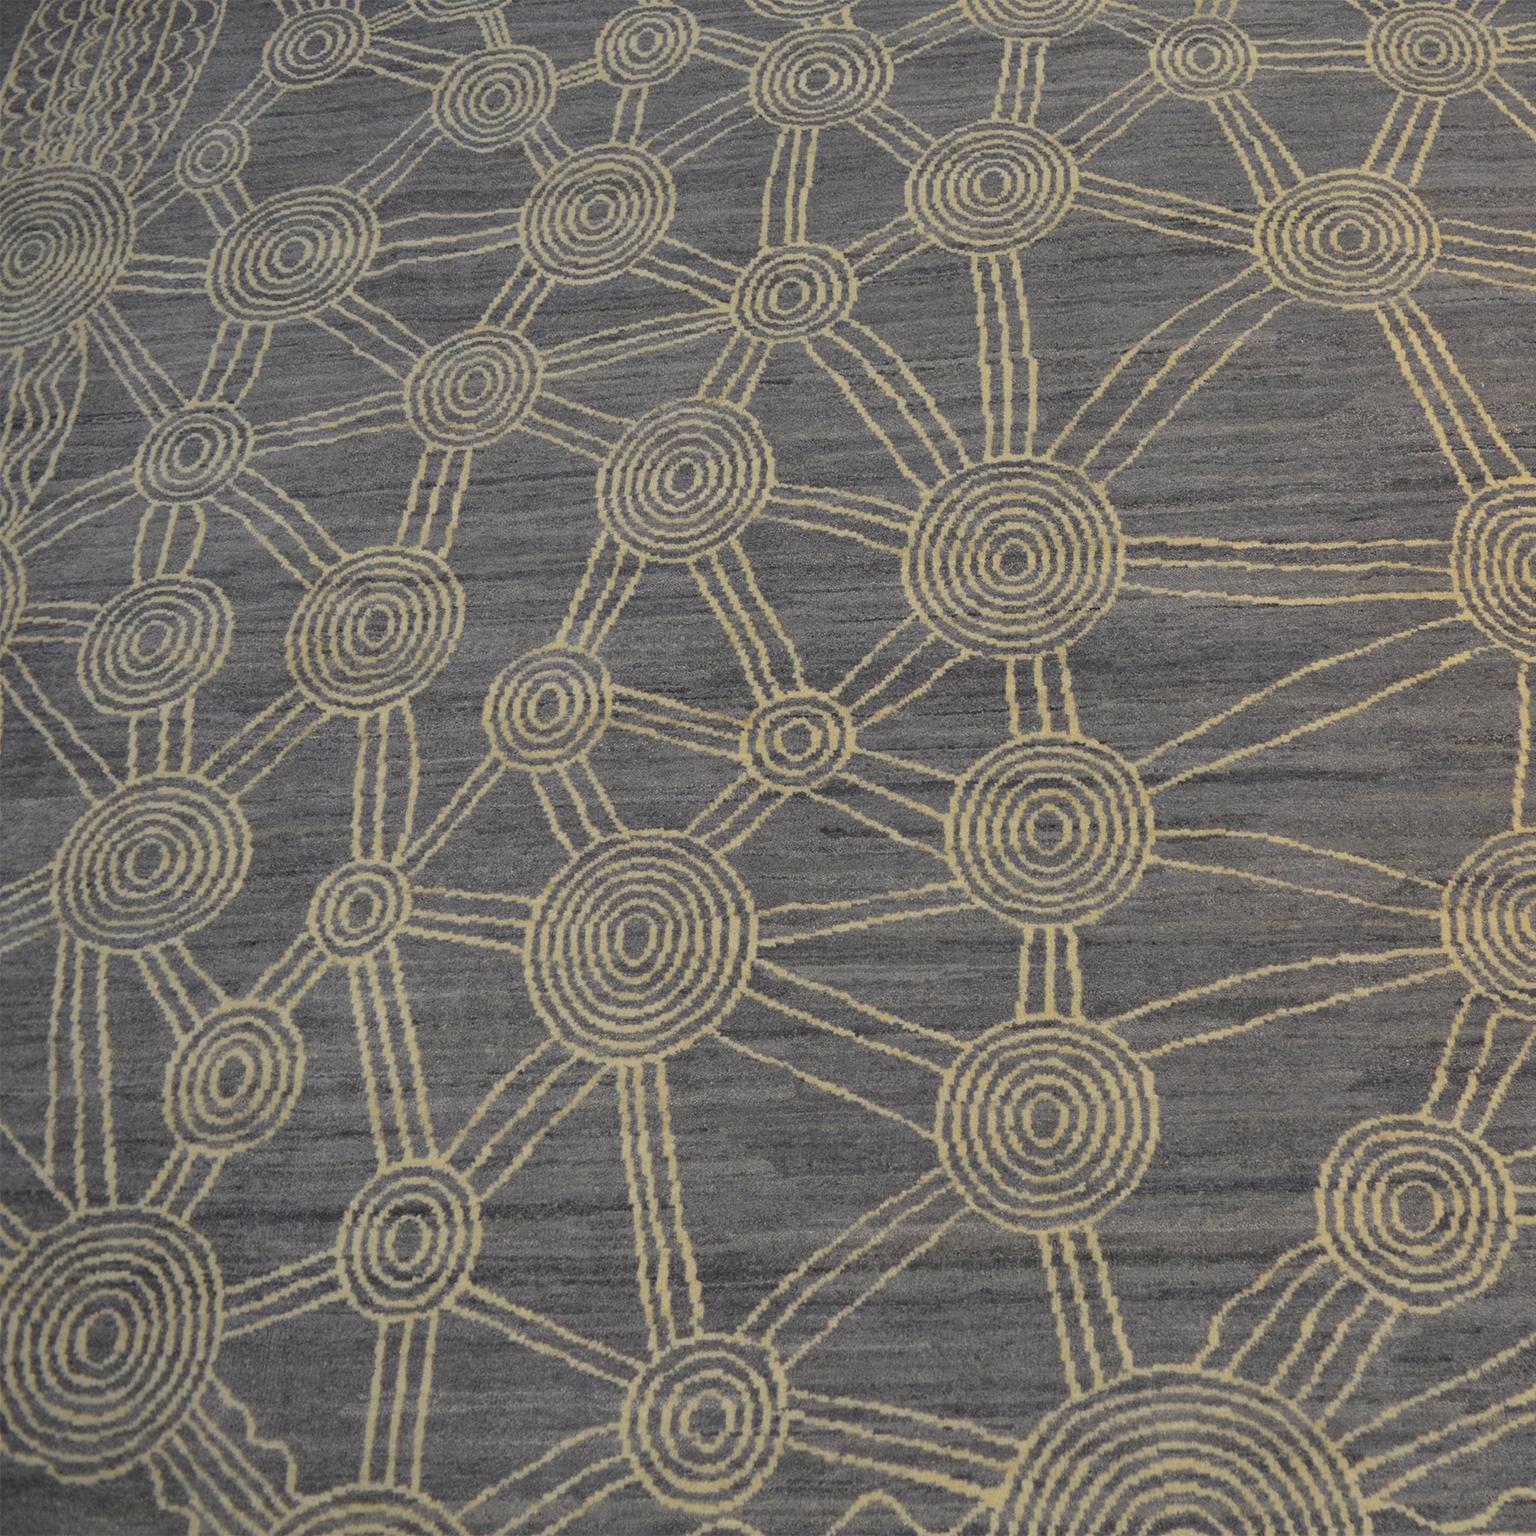 Awaken into your dreams with this gray and cream contemporary 8' x 10' Persian rug by Orley Shabahang, titled 